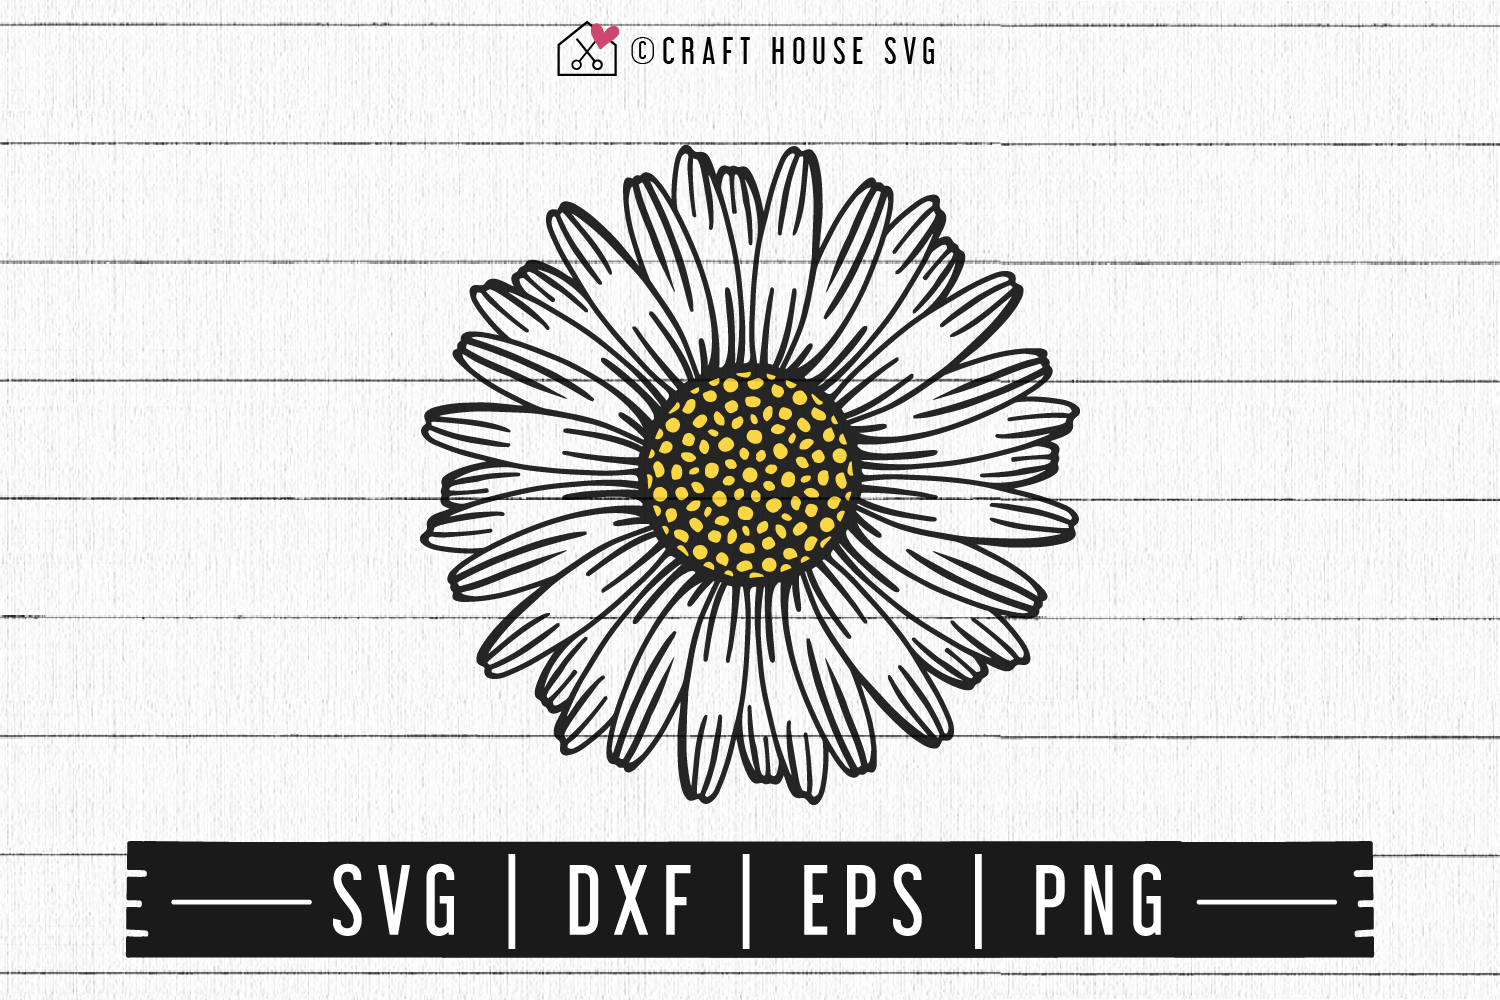 FREE Daisy SVG | FB104 Craft House SVG - SVG files for Cricut and Silhouette